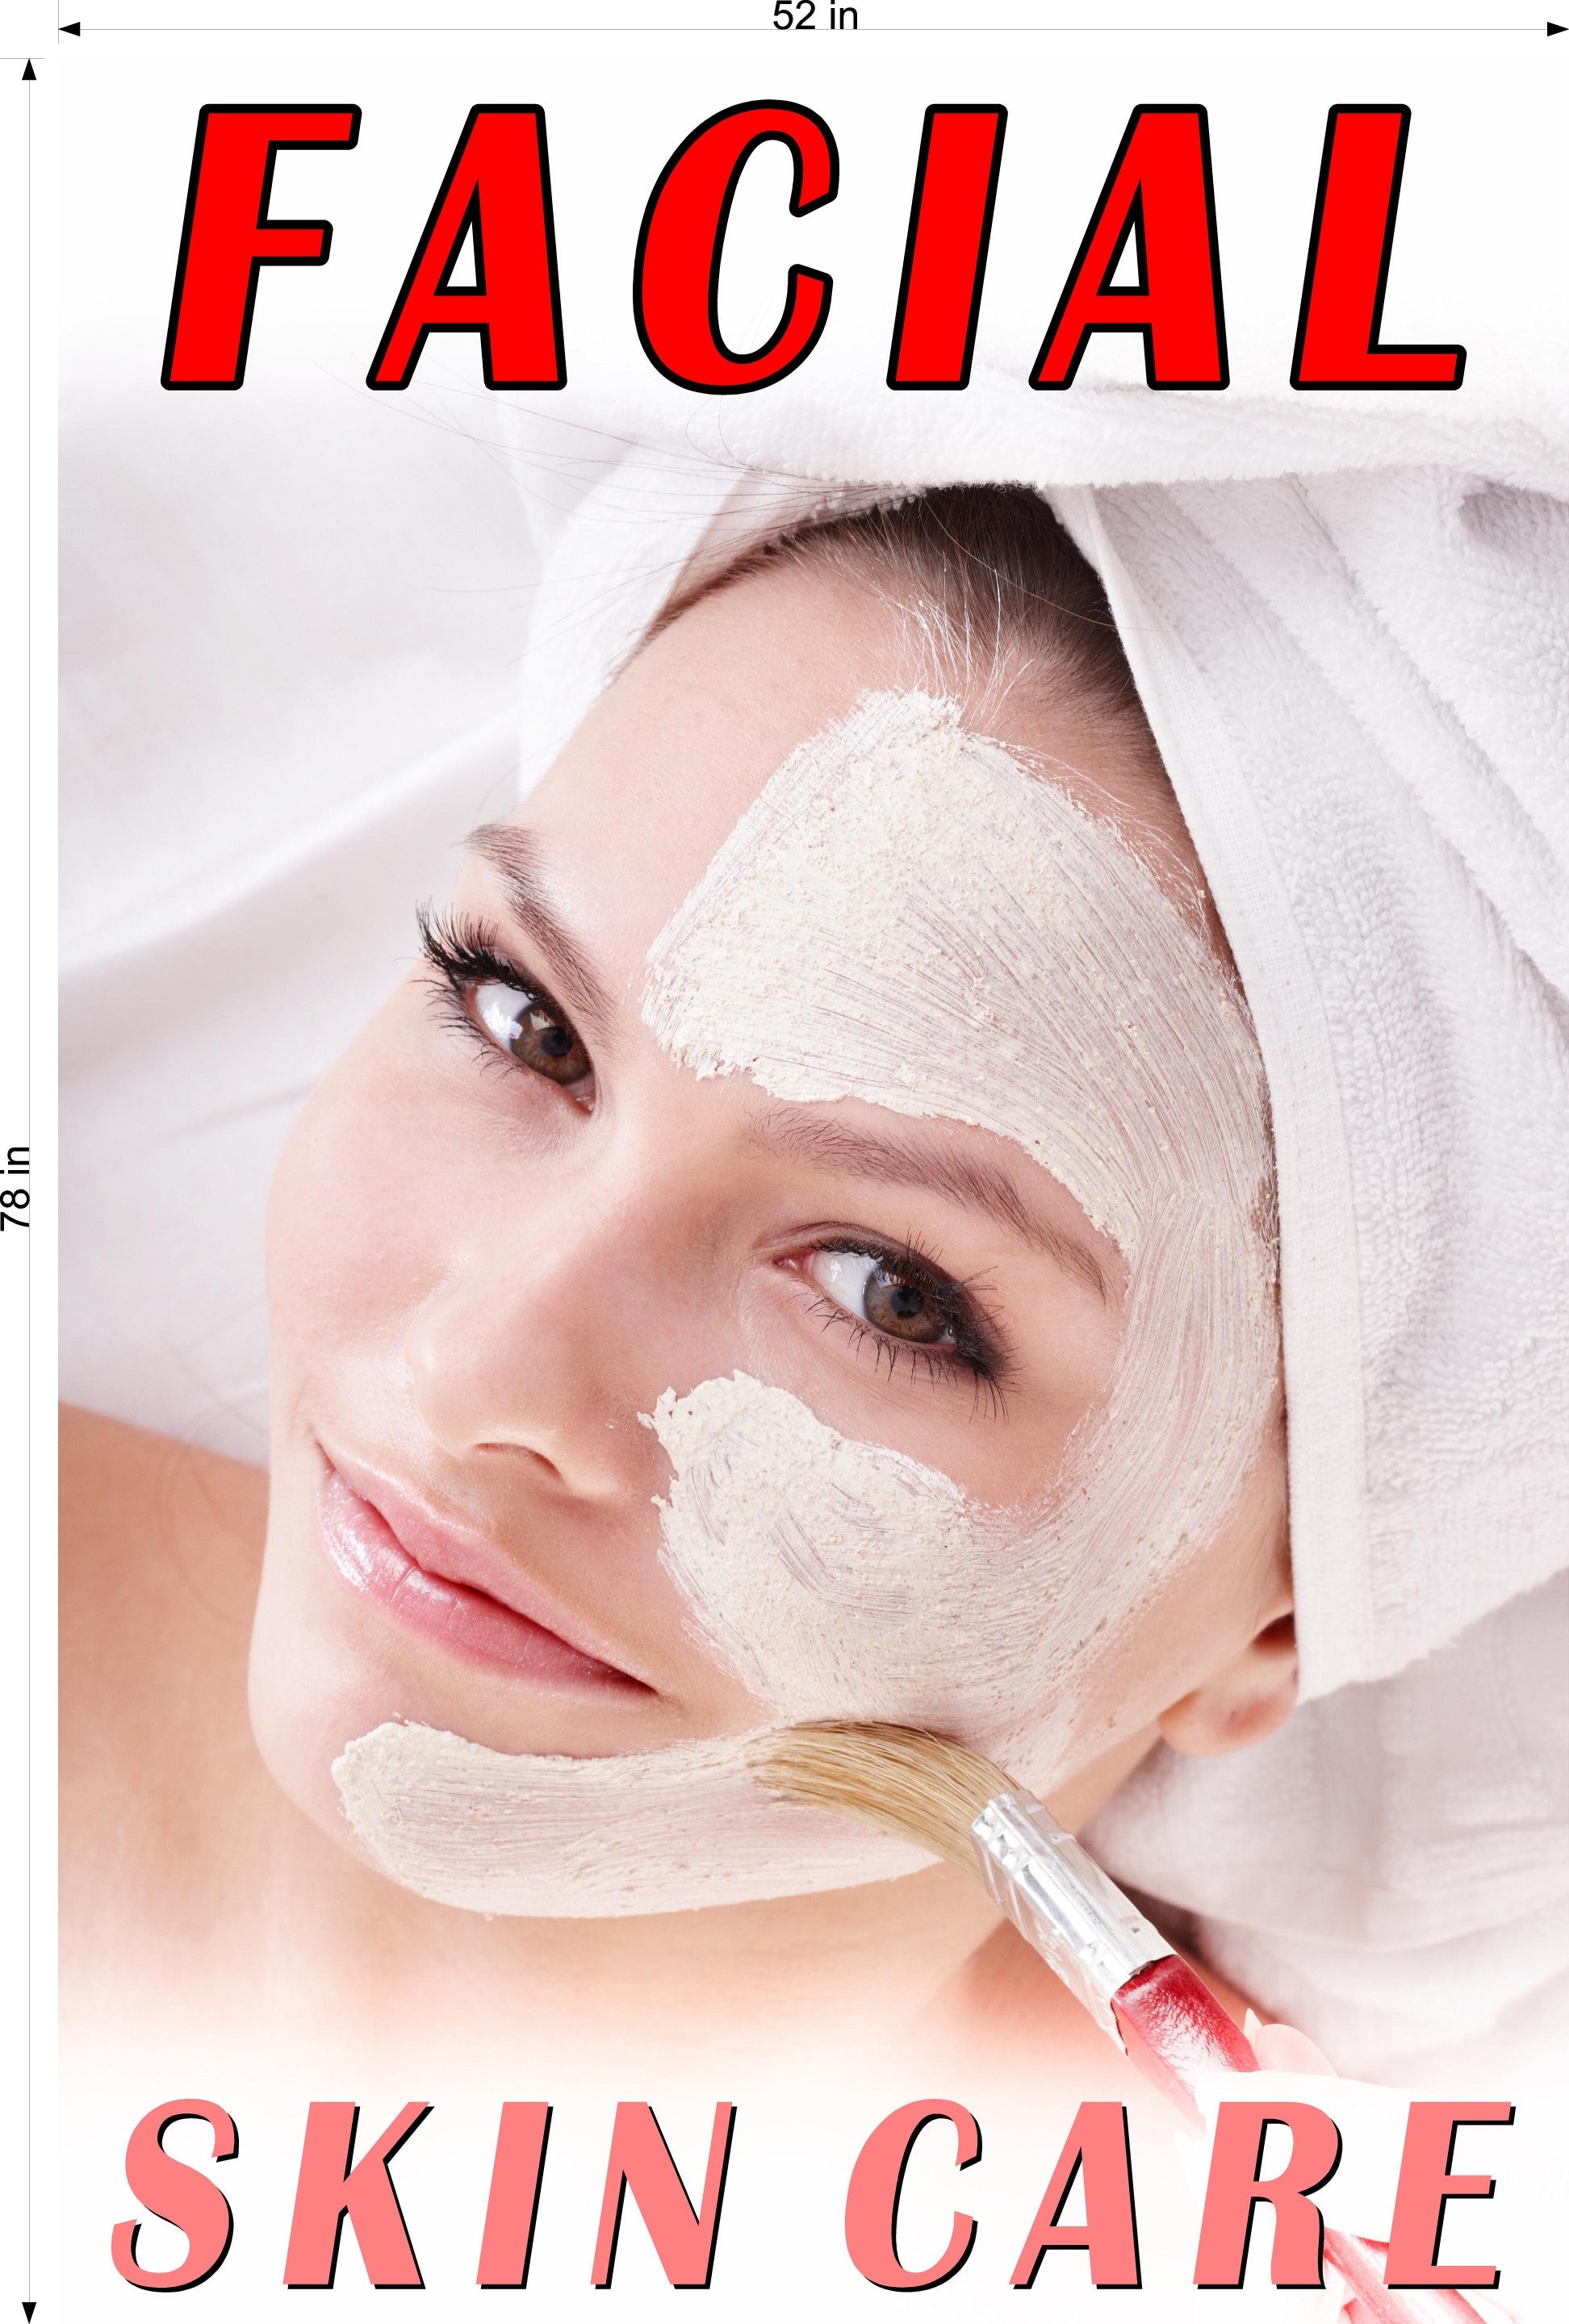 Facial 02 Photo-Realistic Paper Poster Interior Inside Wall Non-Laminated Vertical  Treatment Care